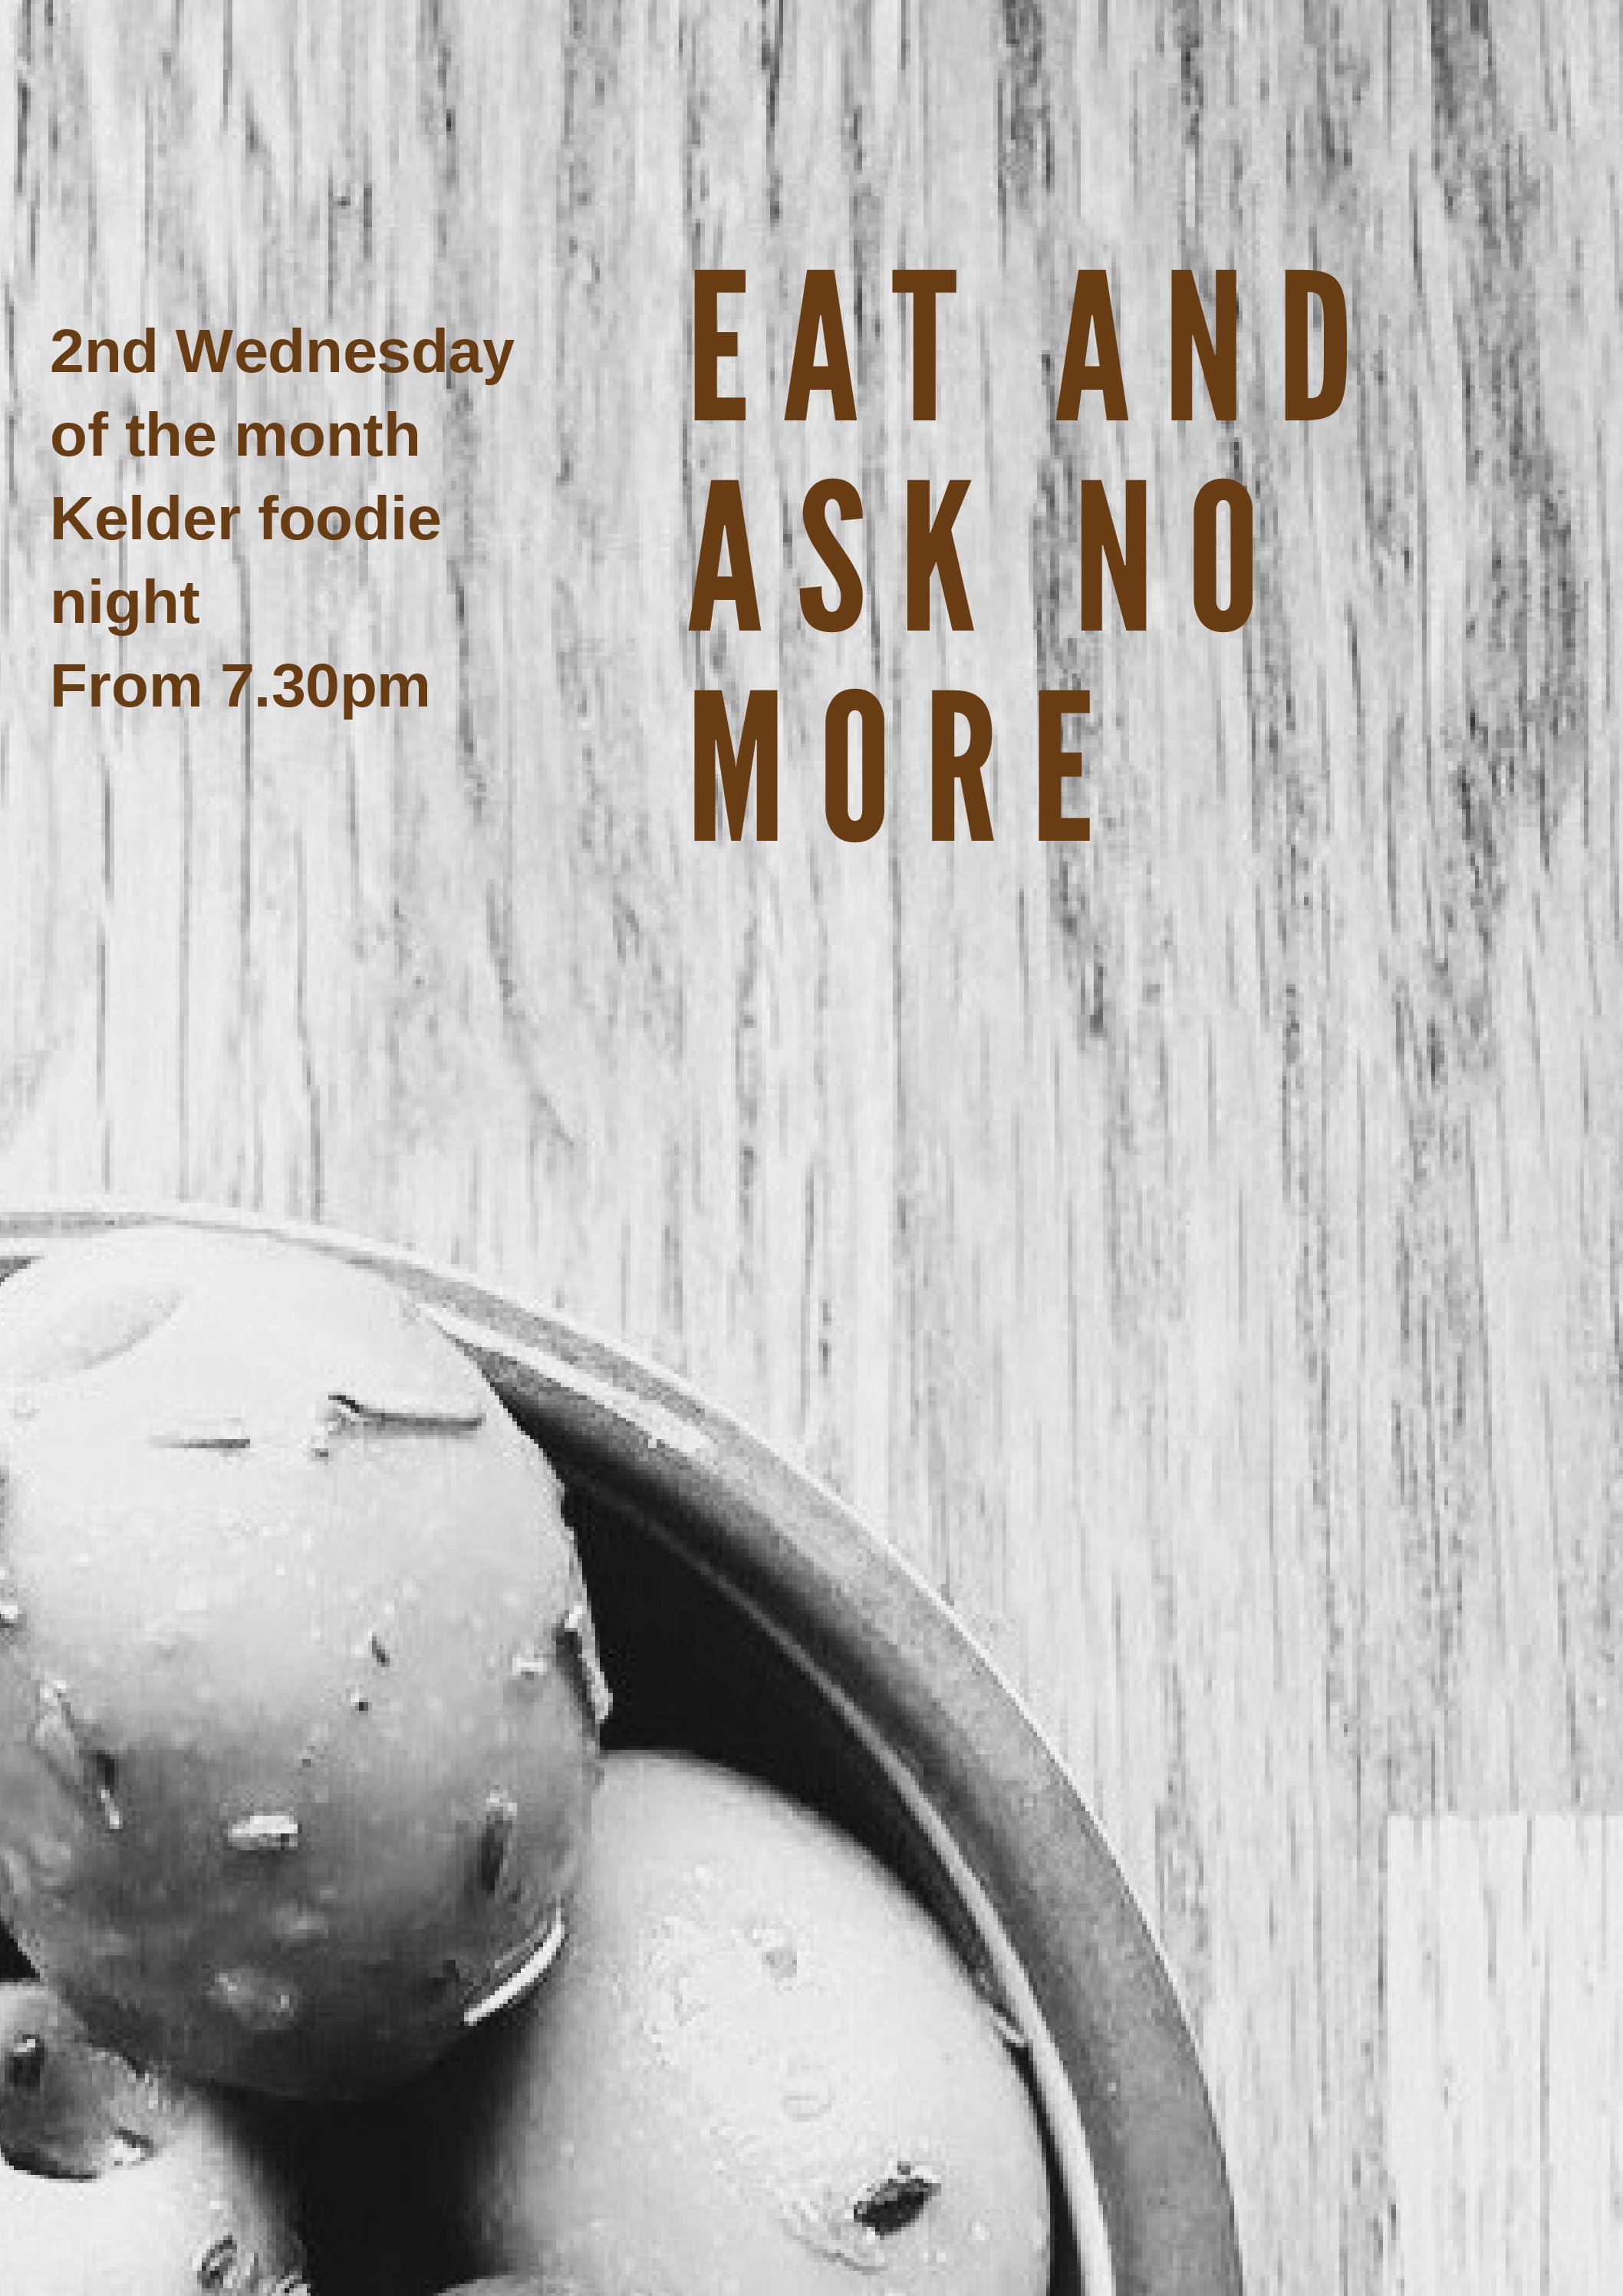 Eat and ask no more – Foodie night